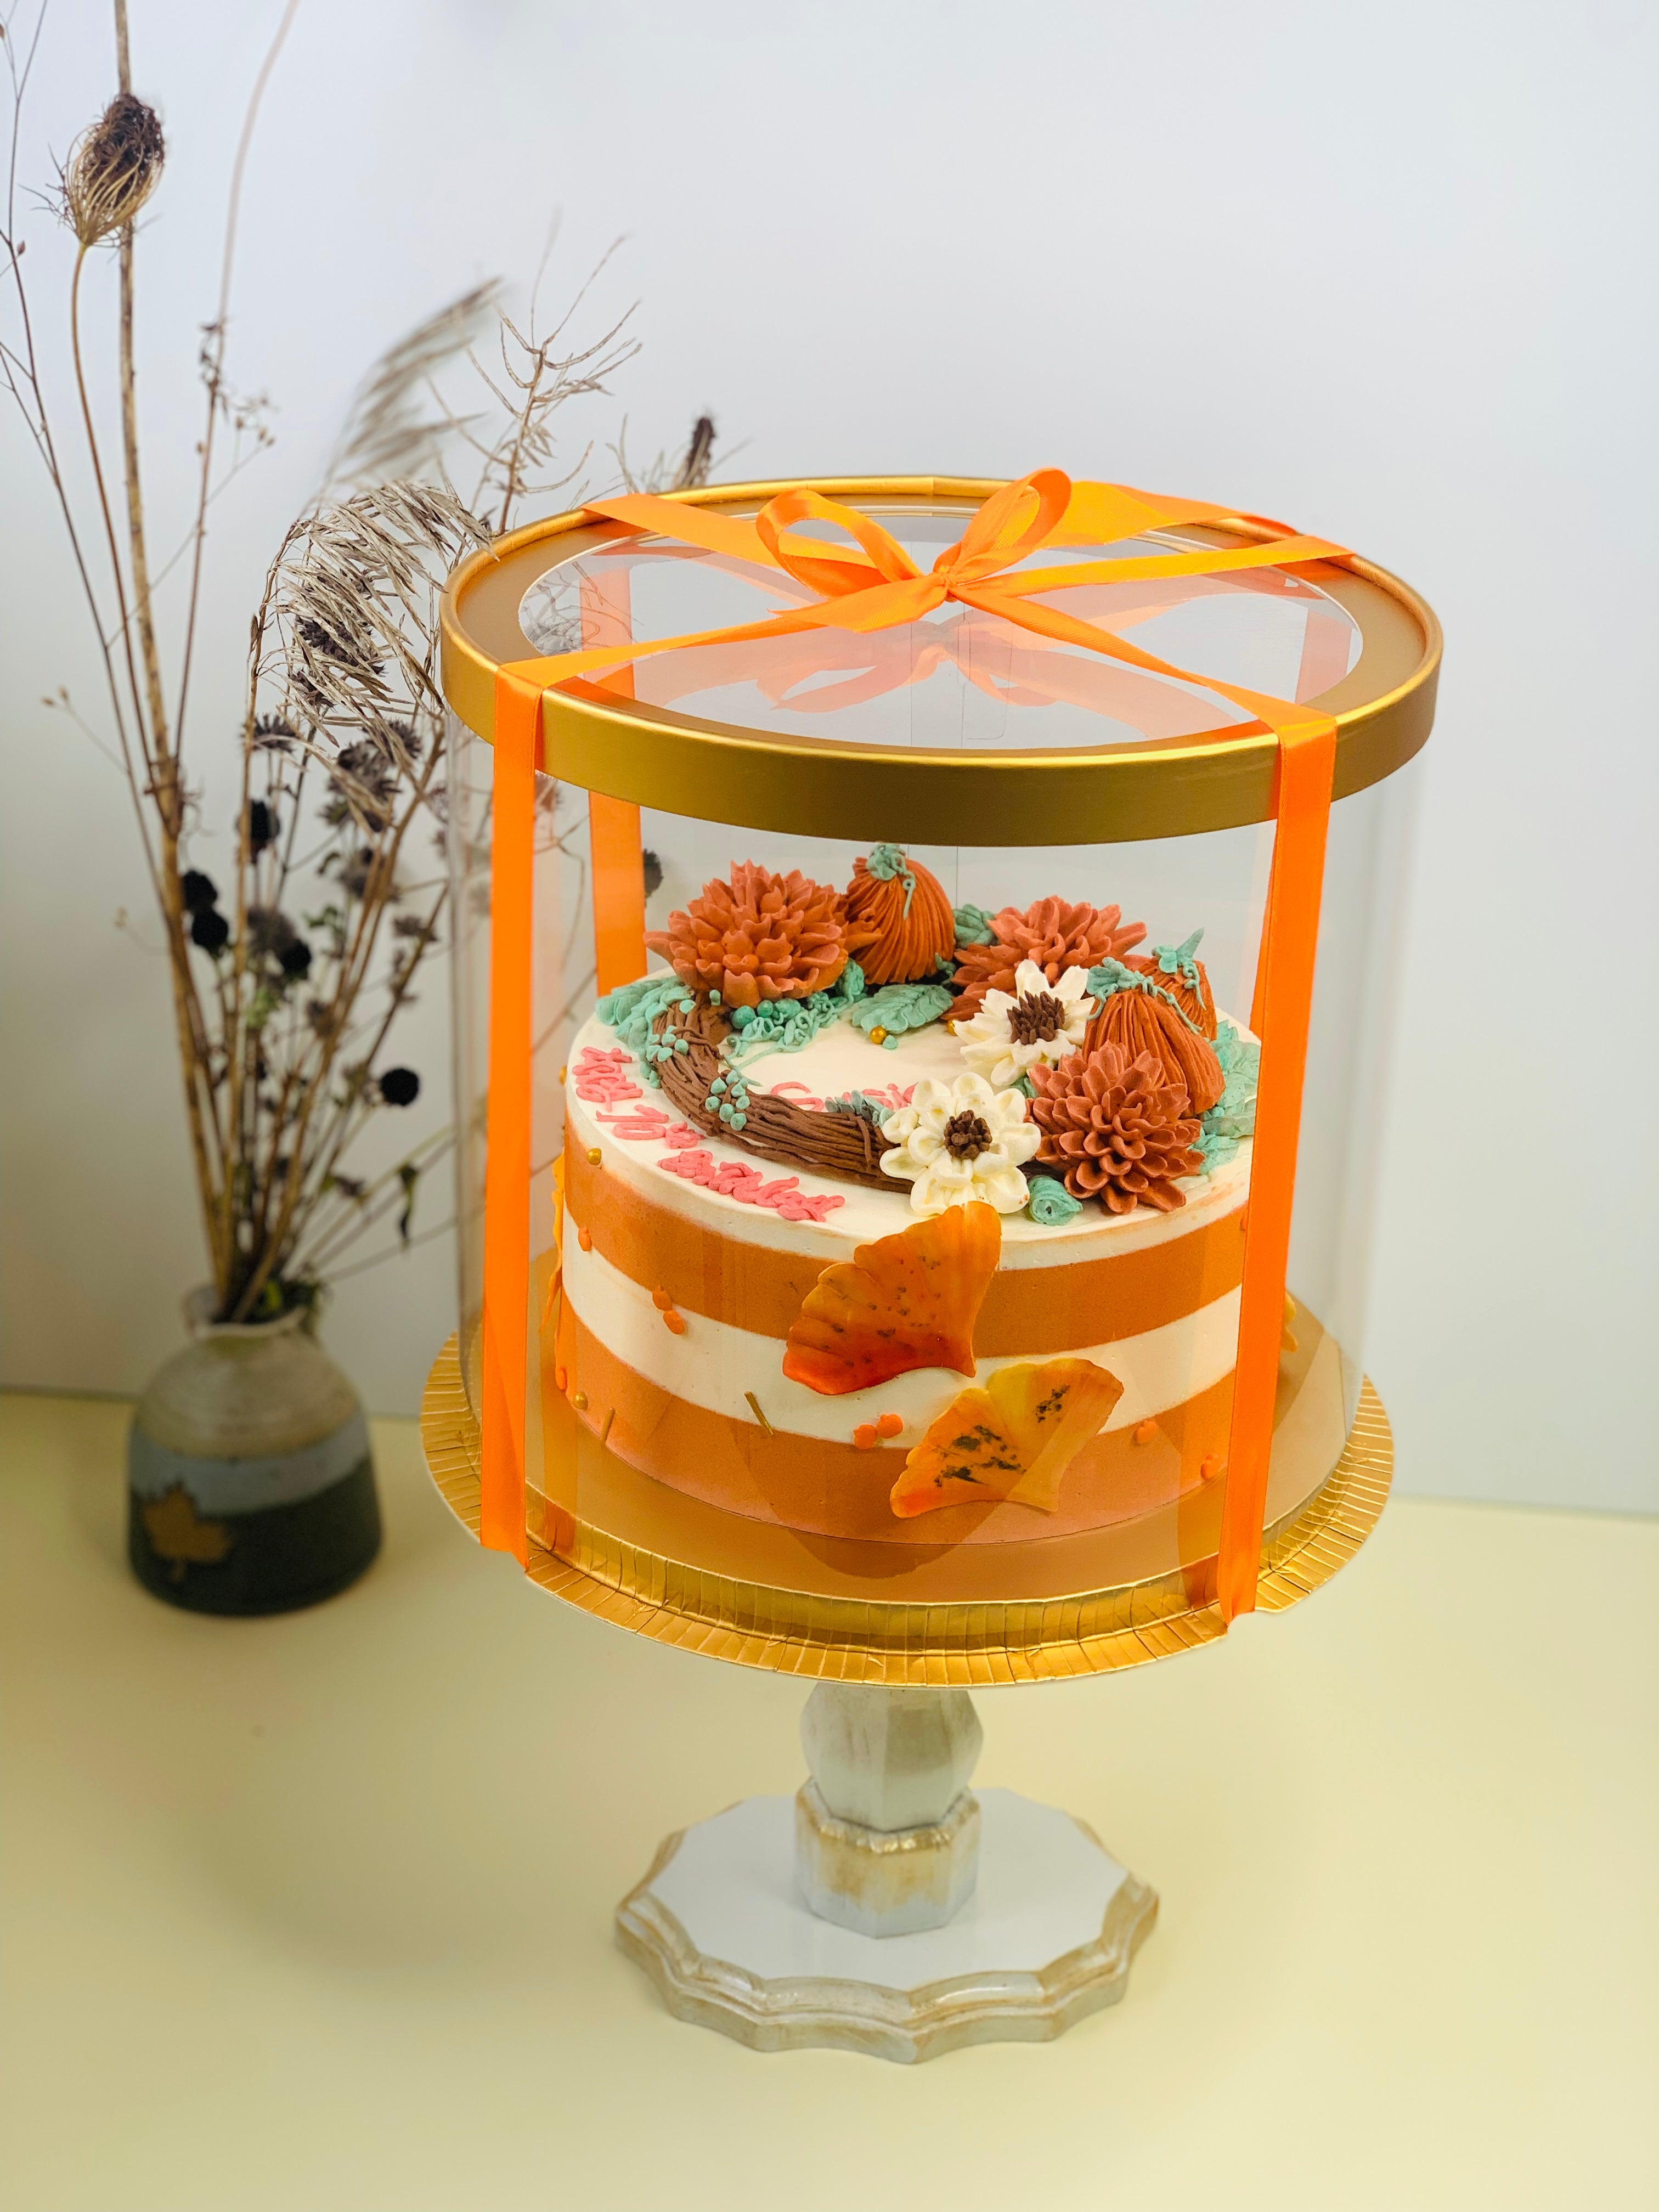 Extra Tall Large Round Clear Cake Box 12